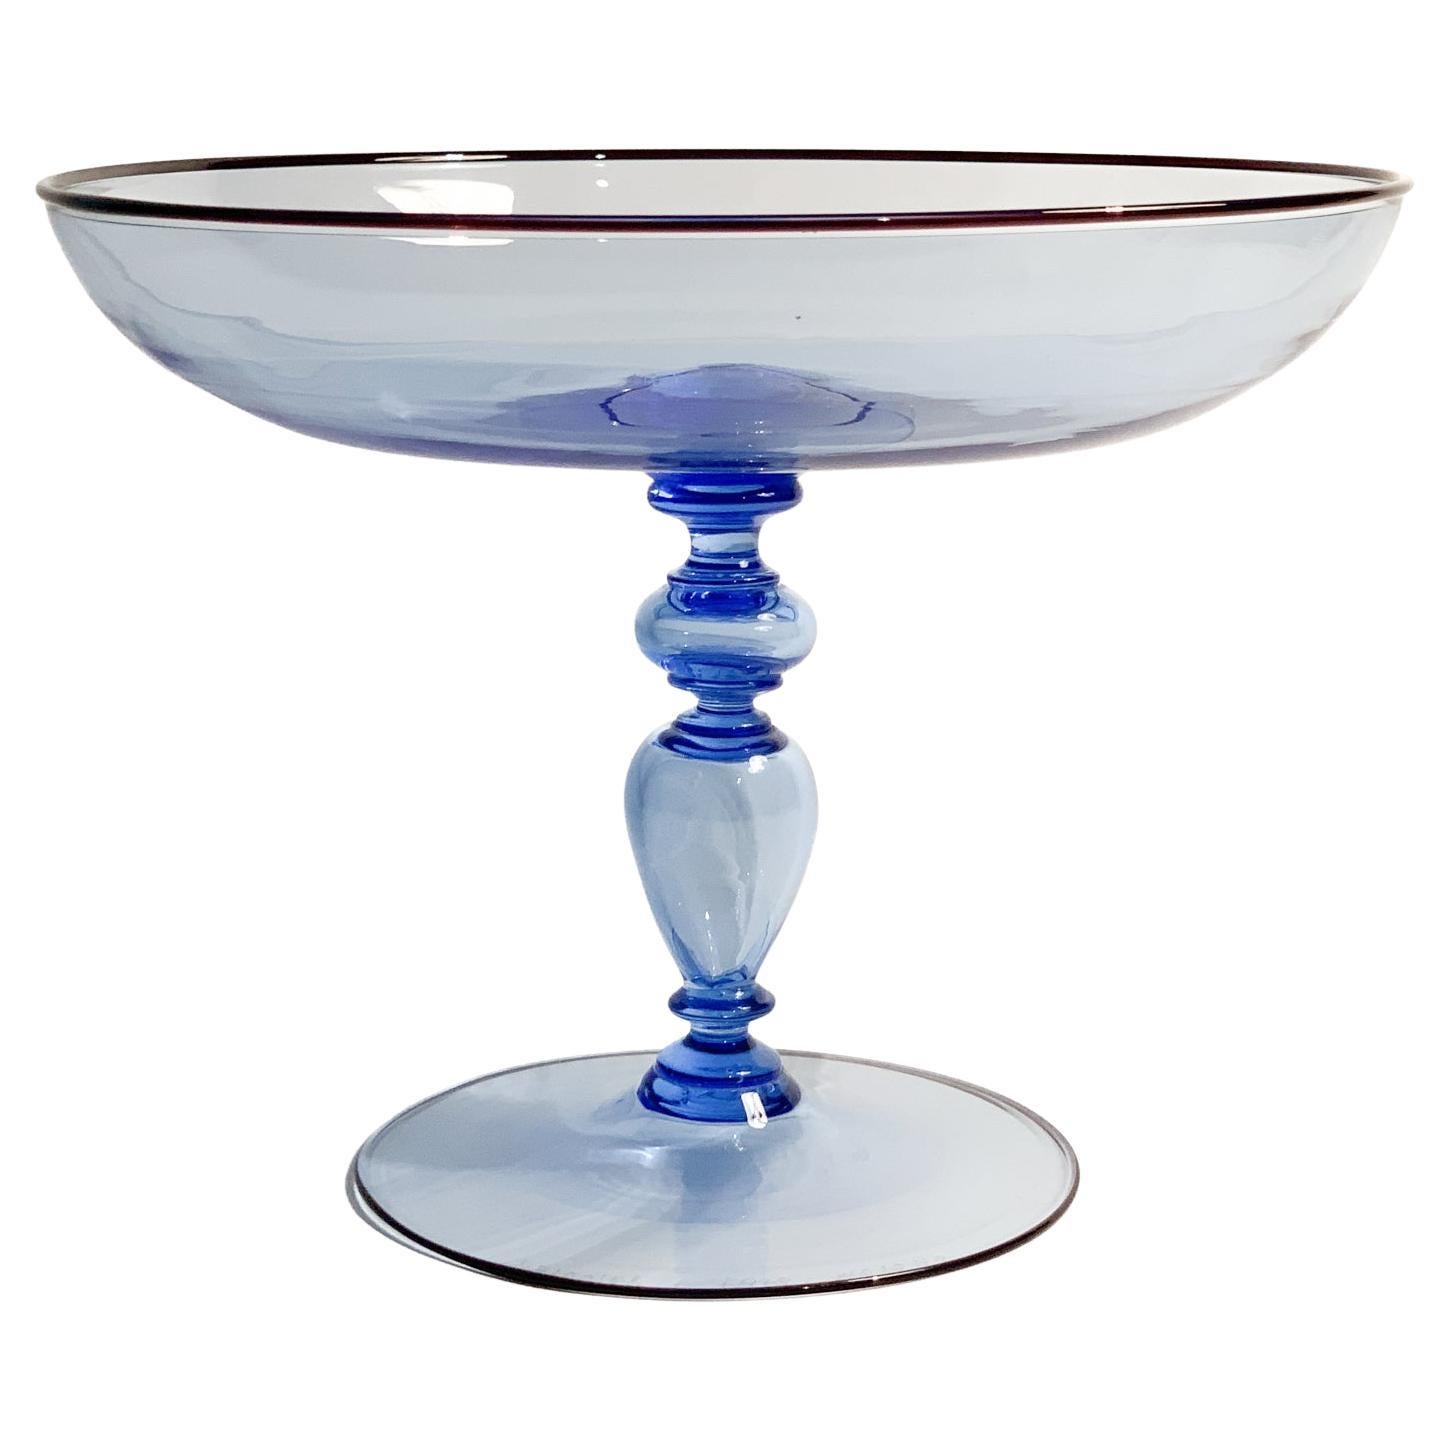 Caravaggio Cup Murano Glass Centerpiece by Barovier & Toso from the 1980s